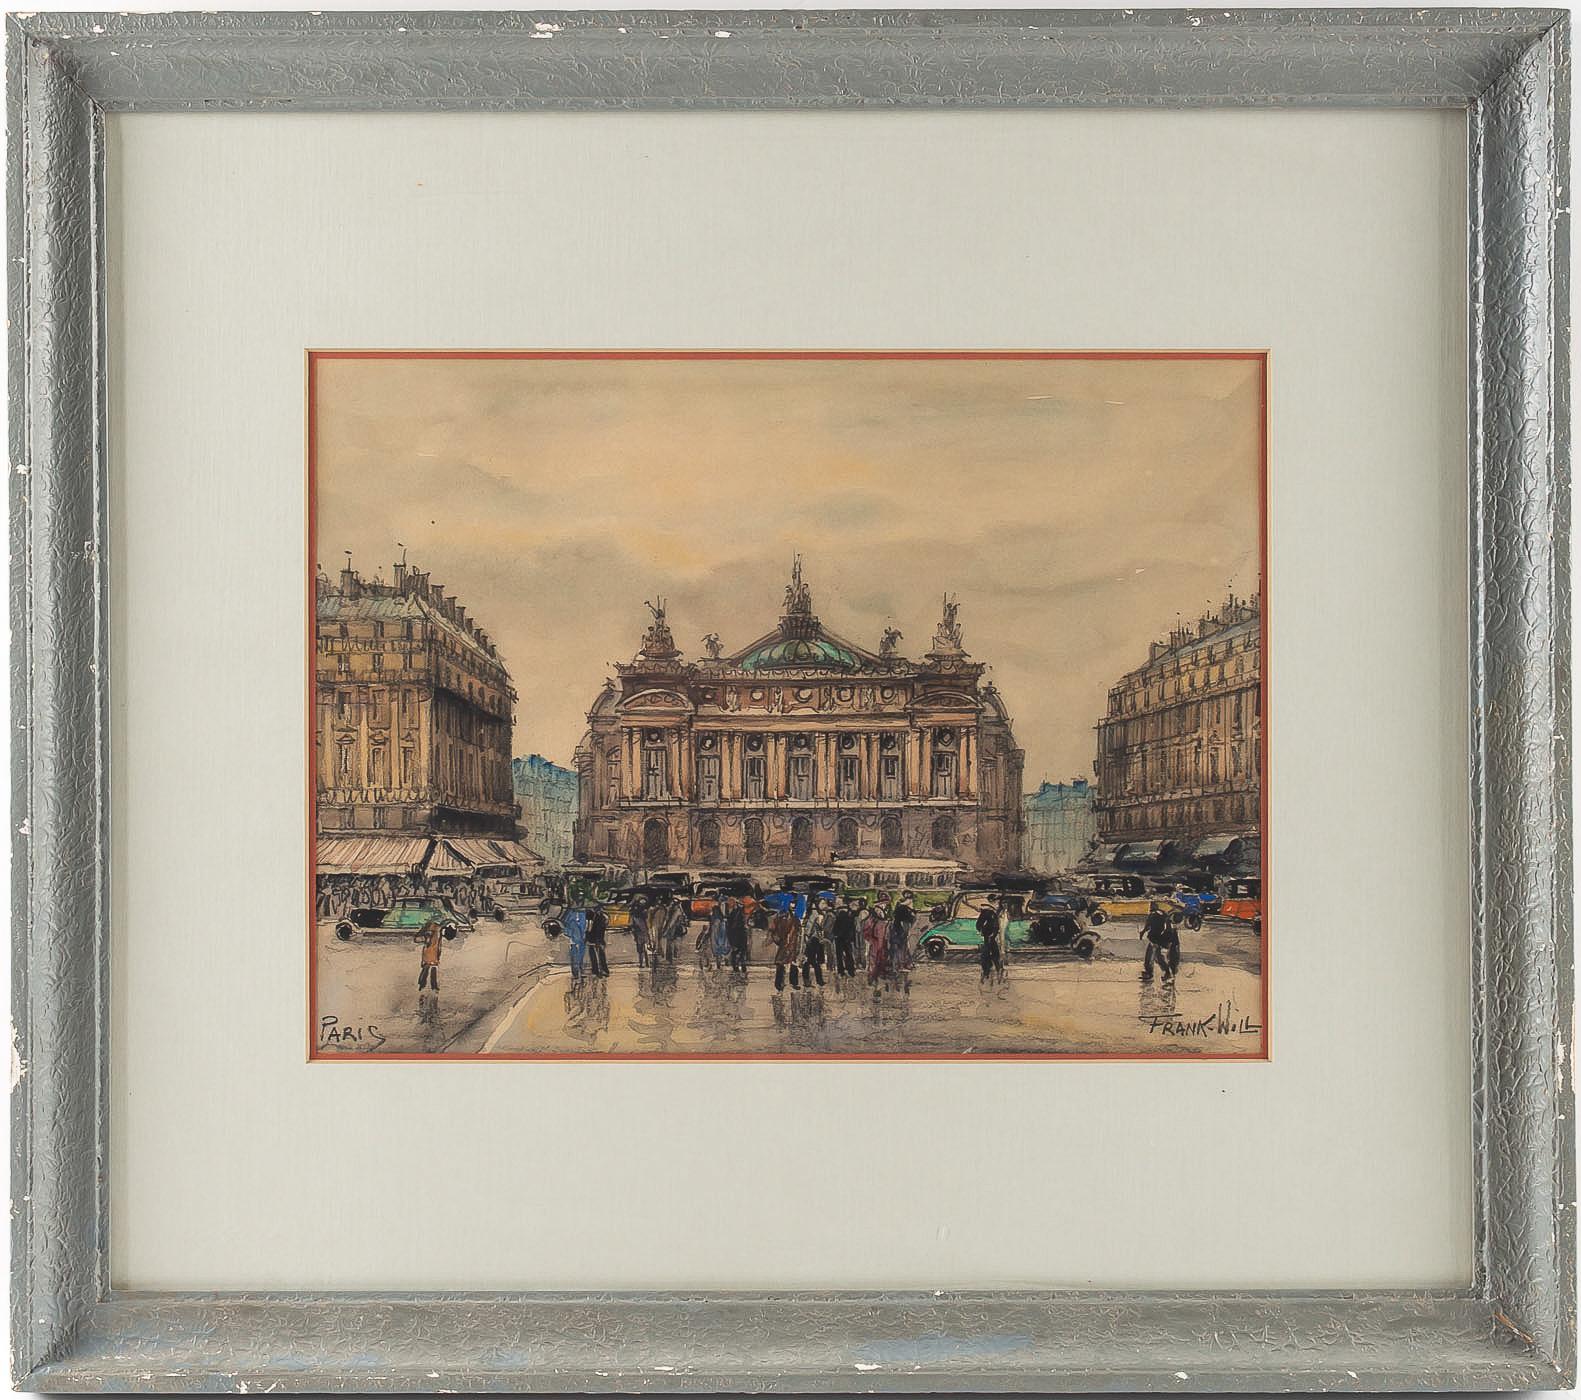 Frank will, watercolor, La Place de l’Opéra in Paris, circa 1930s. 

A beautiful watercolor sign on a lower right by Frank Will, French, and American painter and watercolorist. Our watercolor depicting the opera square in Paris in the